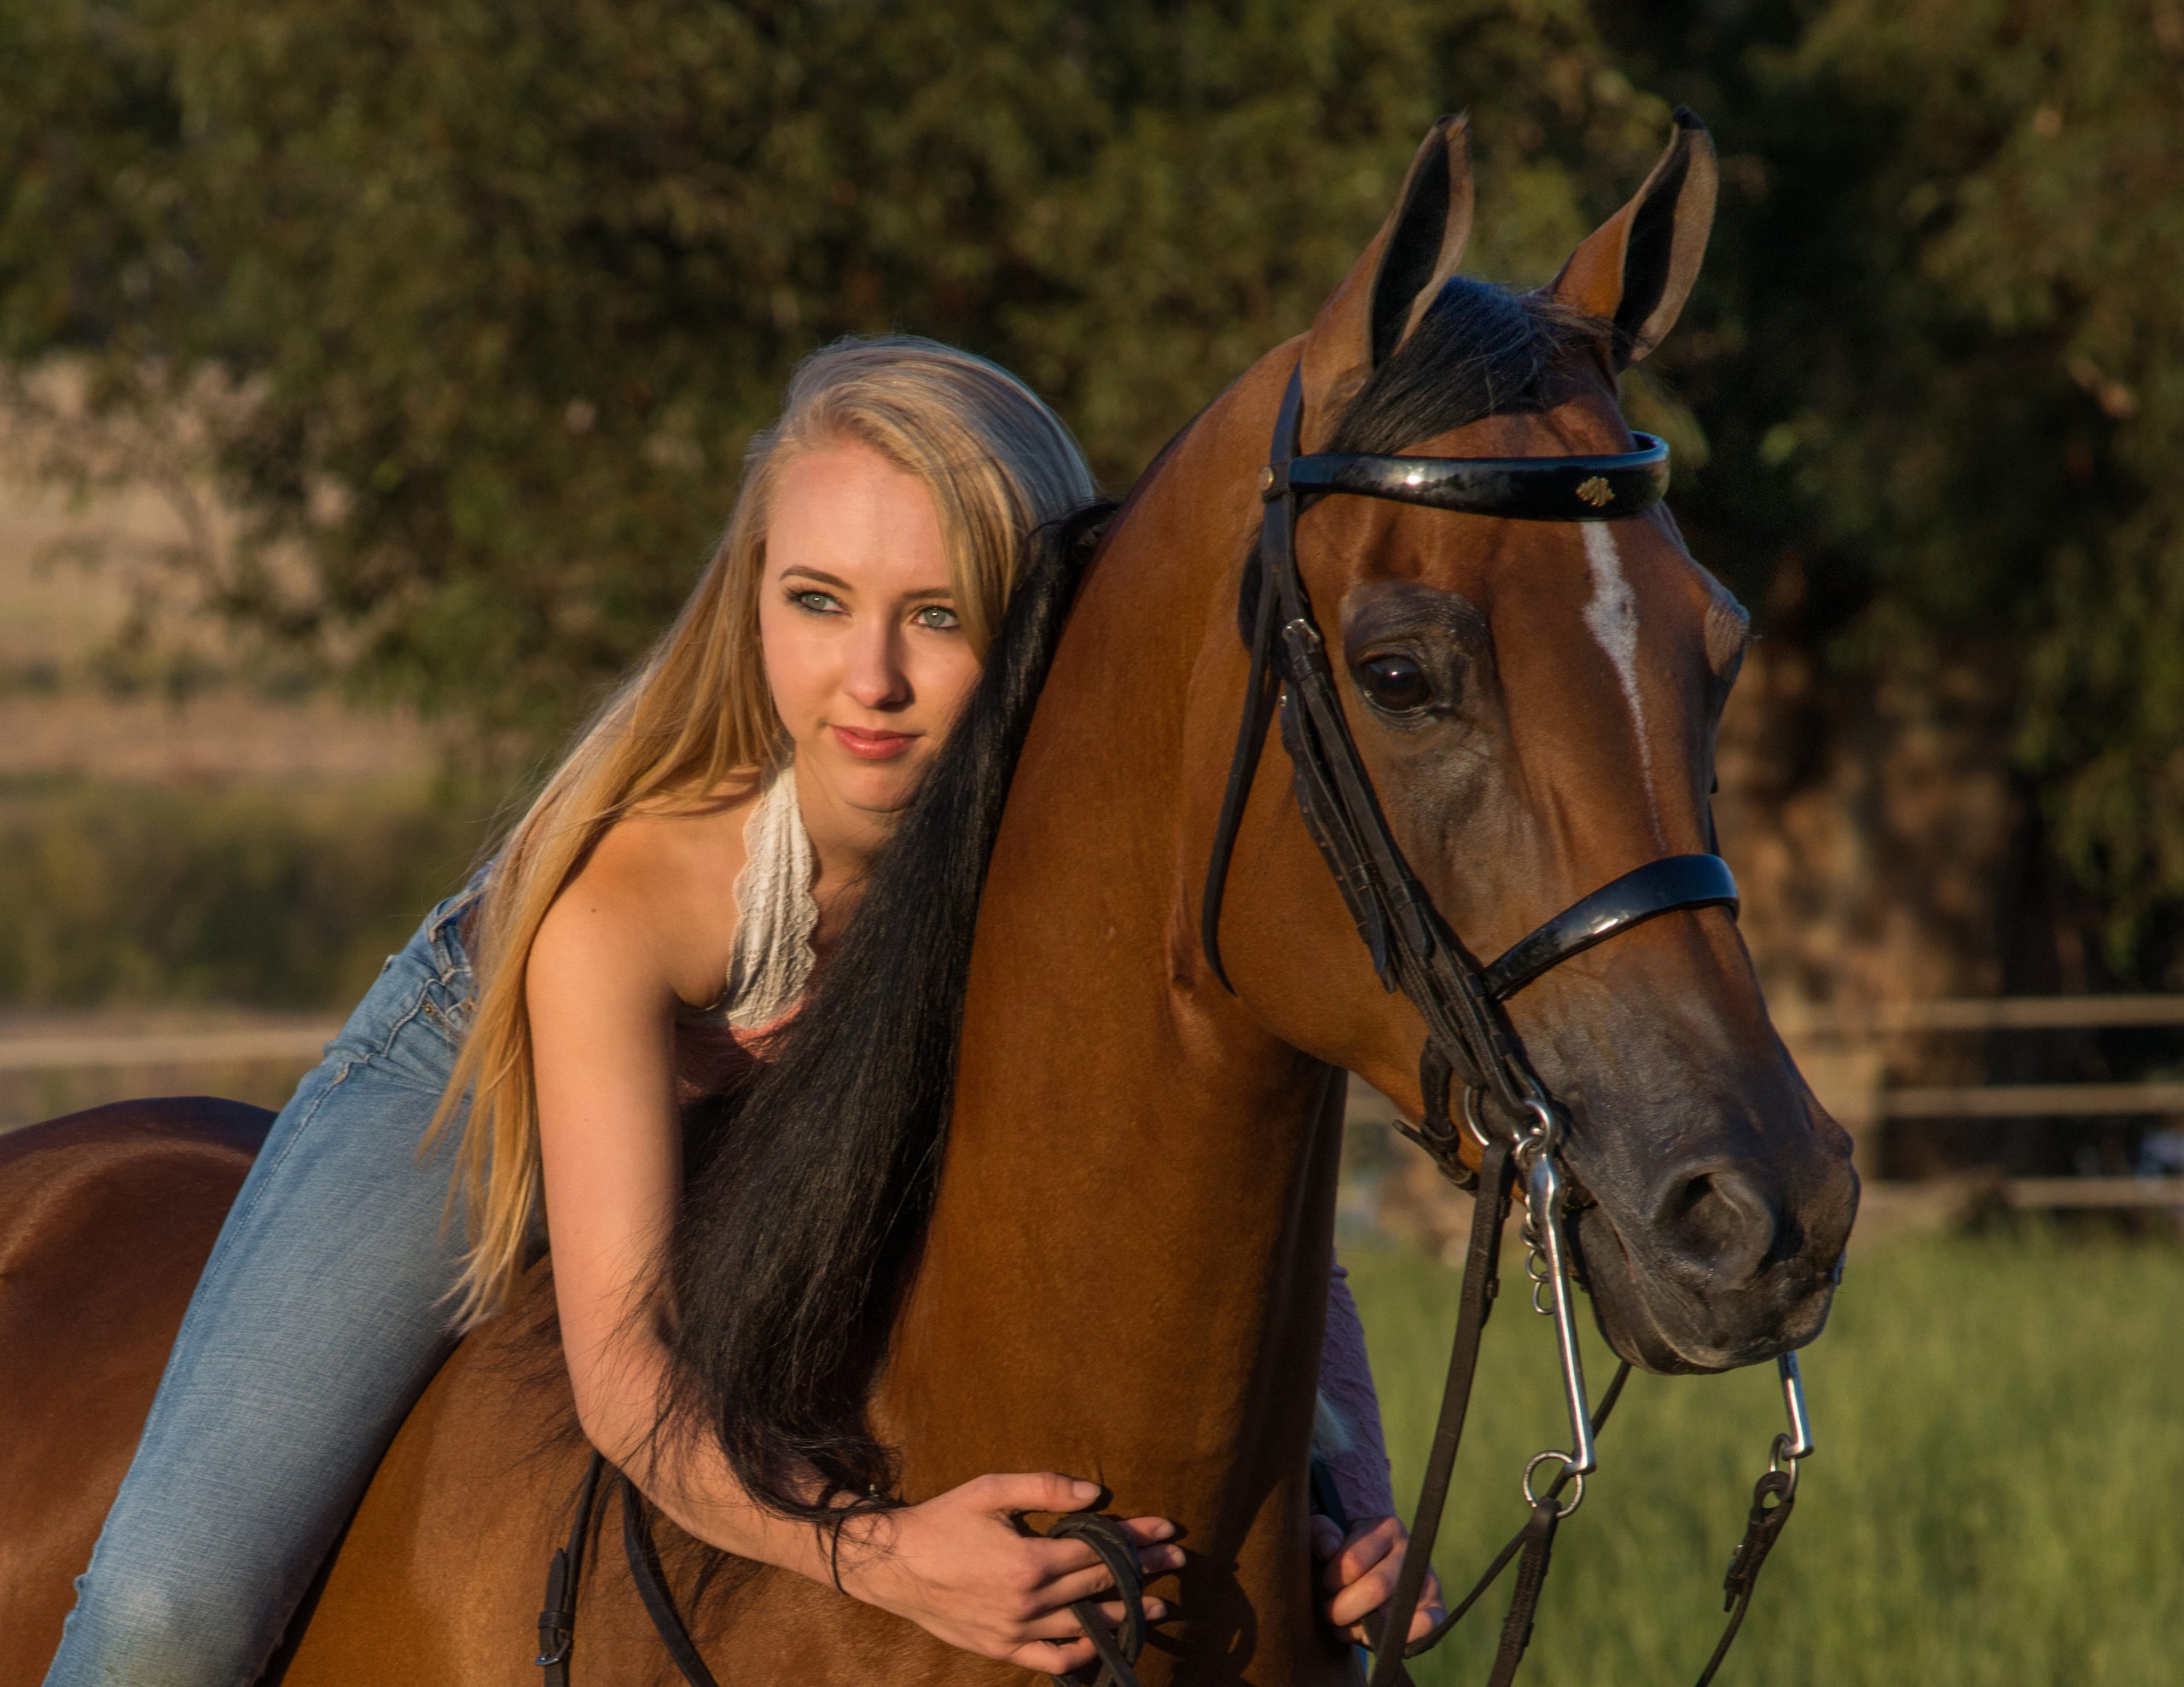 Equine Photographer in San Francisco Bay Area - Horse Photography